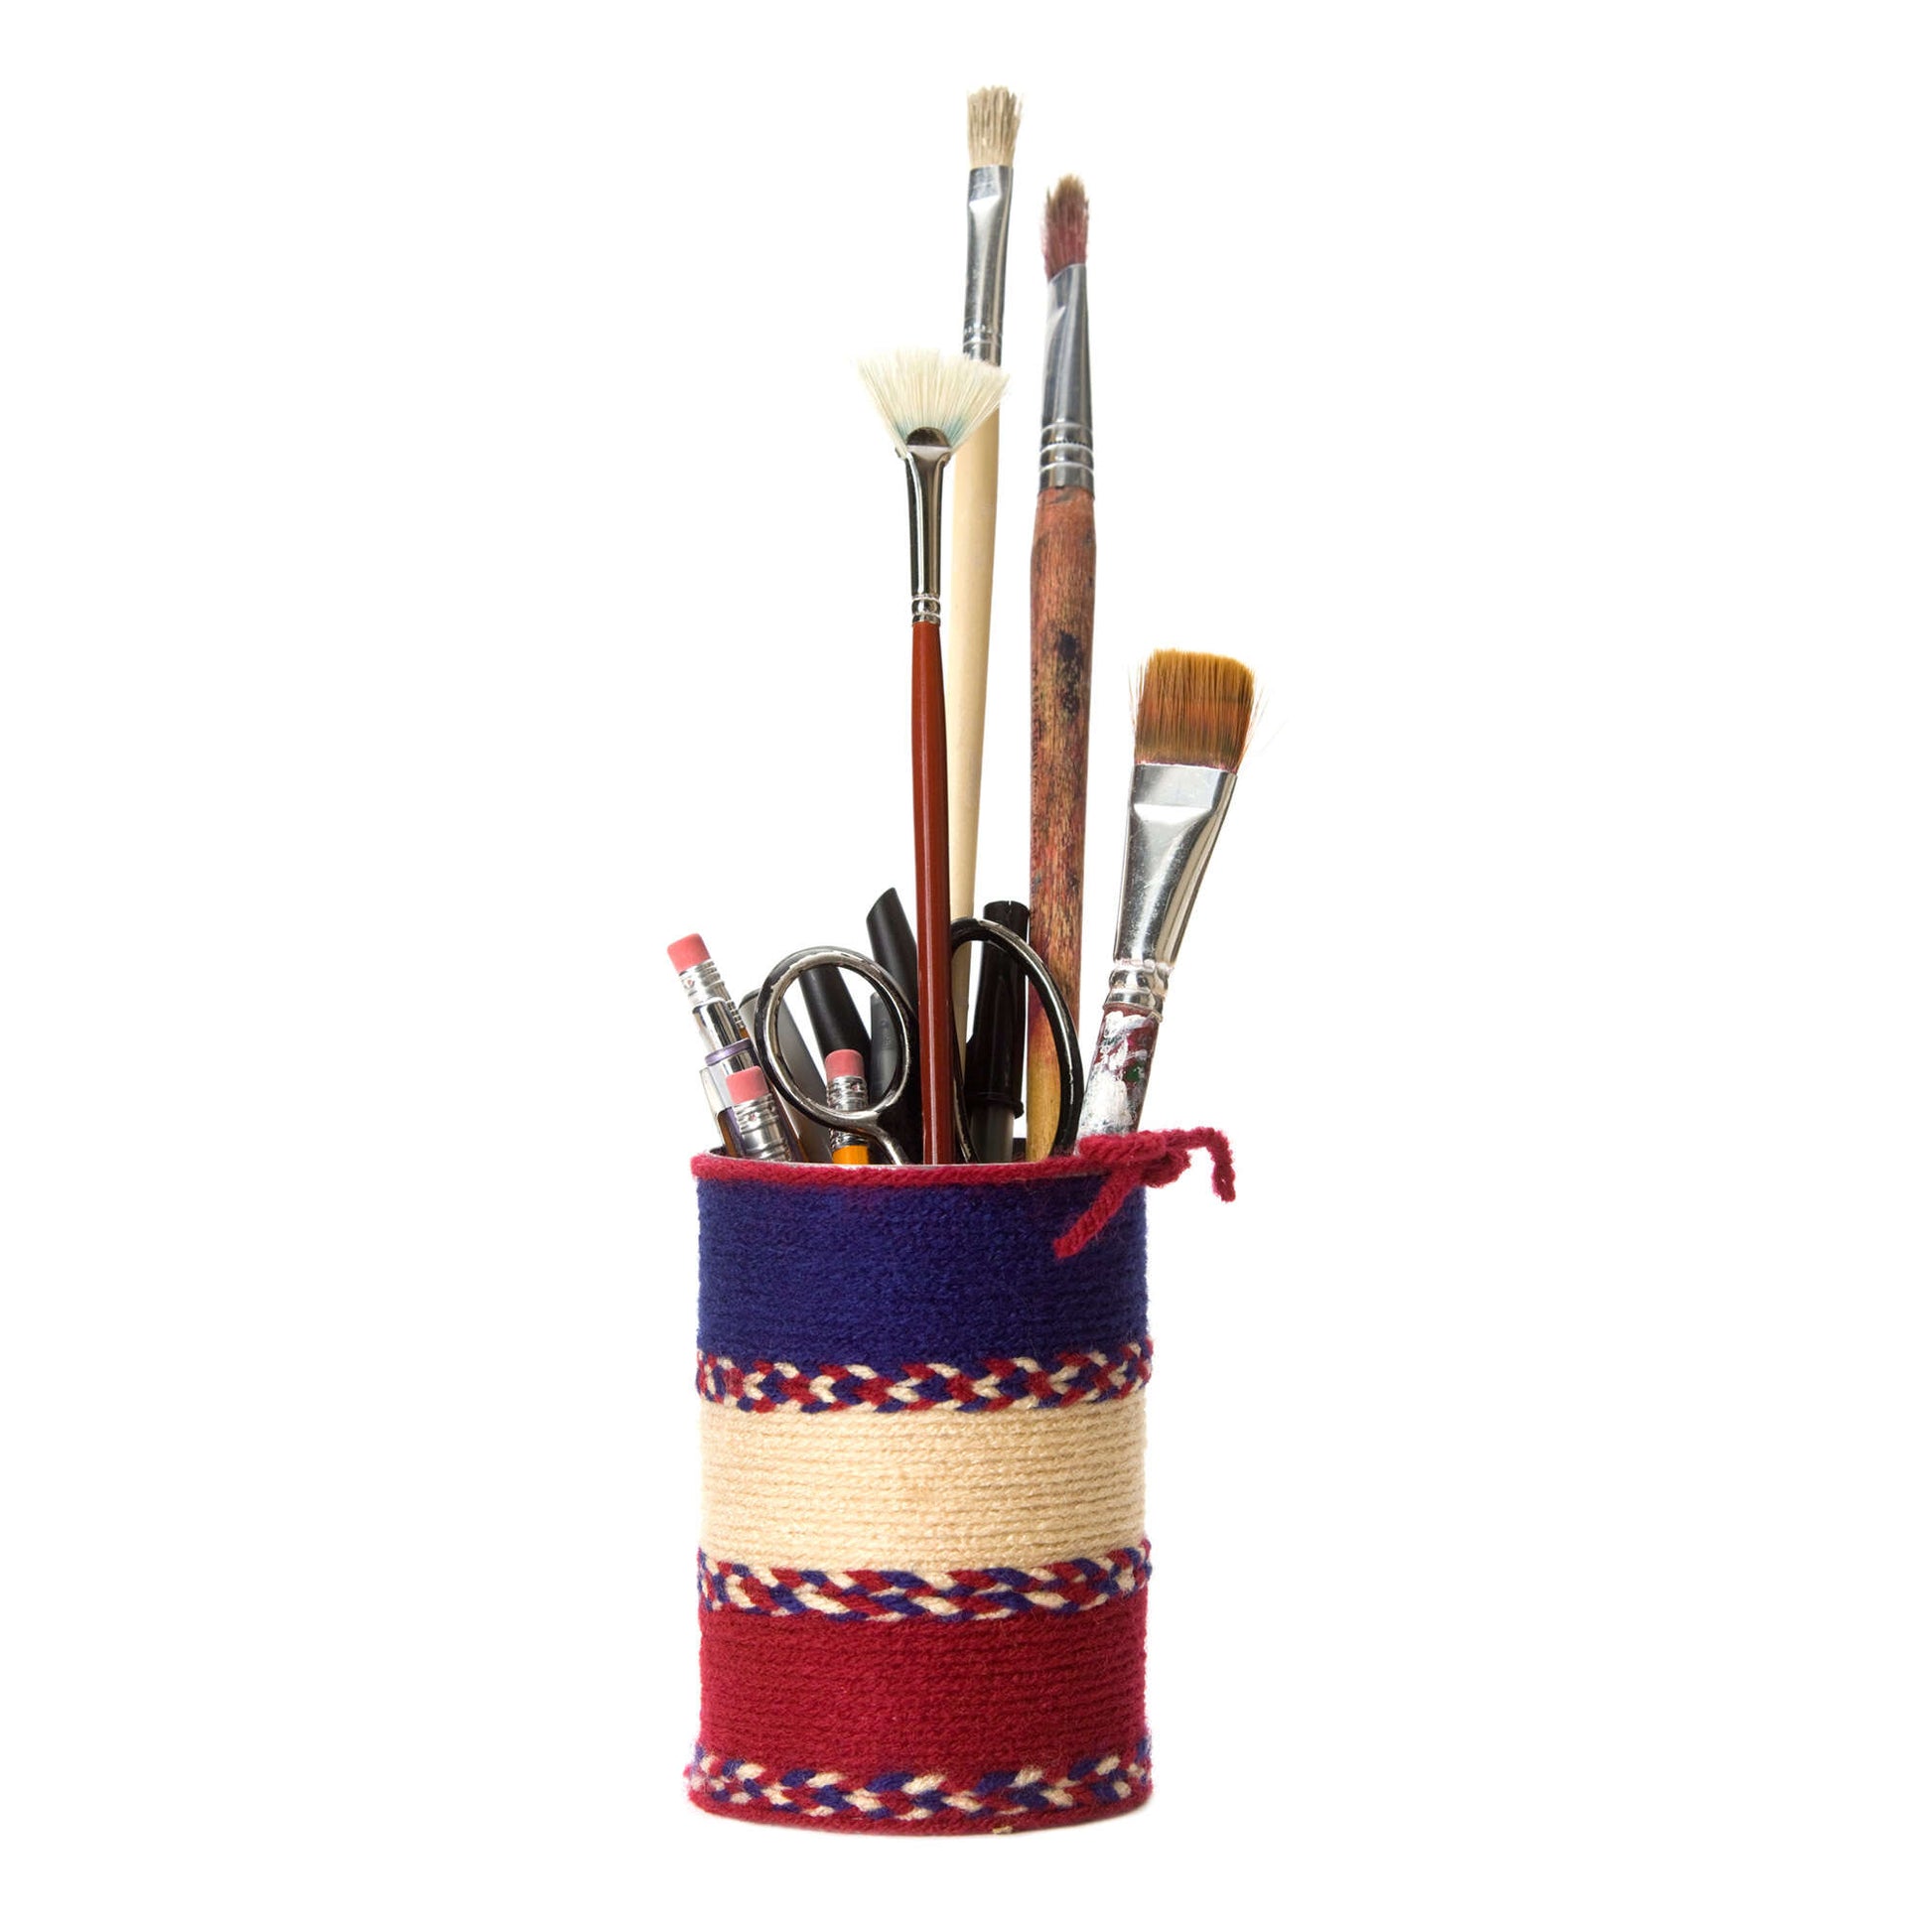 Free Red Heart Pencil Can Holder Craft Pattern